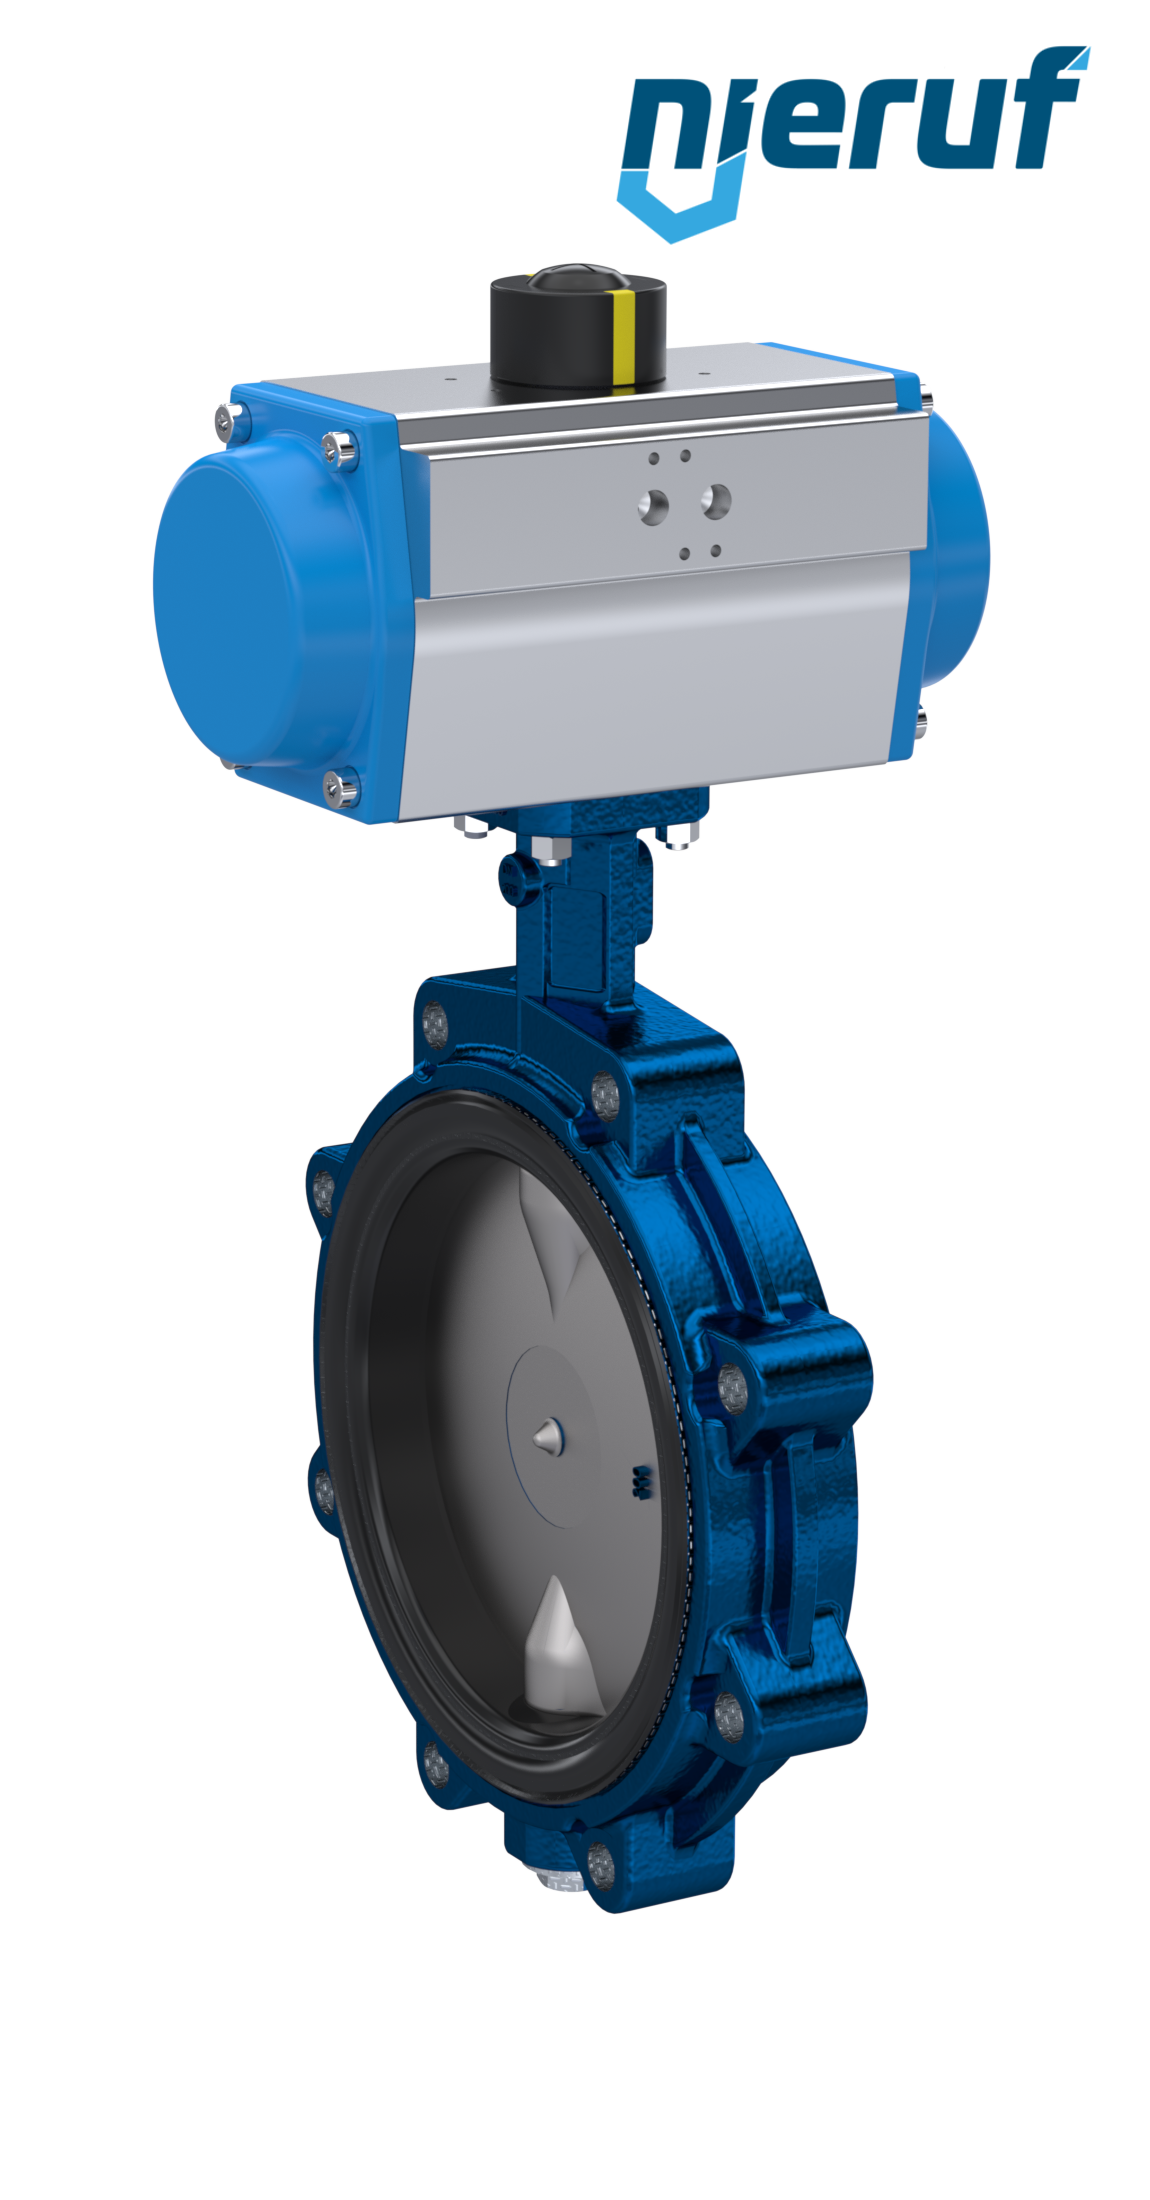 Butterfly valve DN 150 AK02 EPDM DVGW drinking water, WRAS, ACS, W270 pneumatic actuator double acting